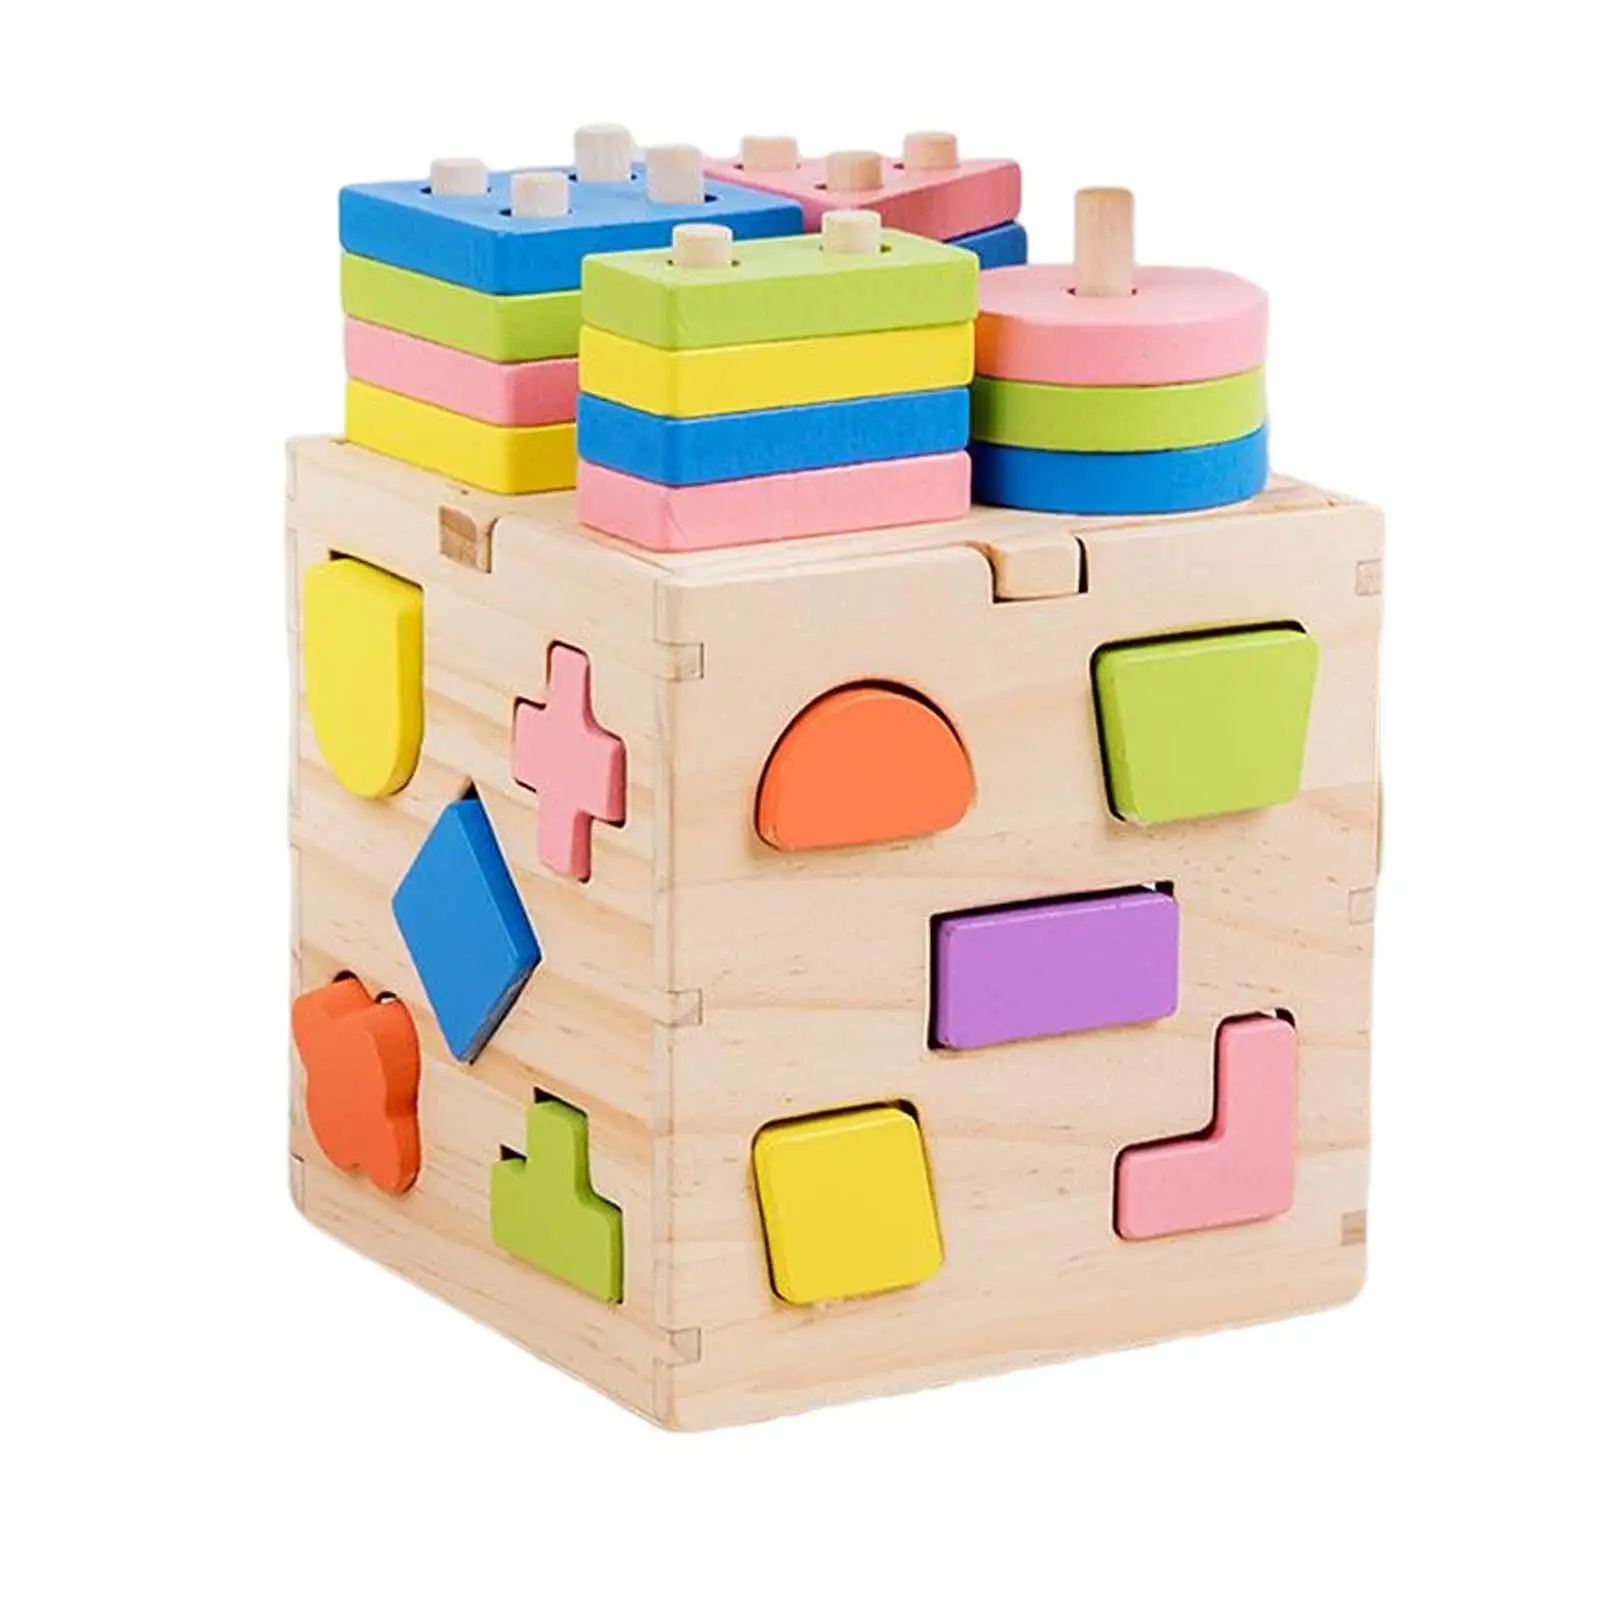 Geometric Shape Toy Early Educational Toys Develop Fine Motor Skill for Kids